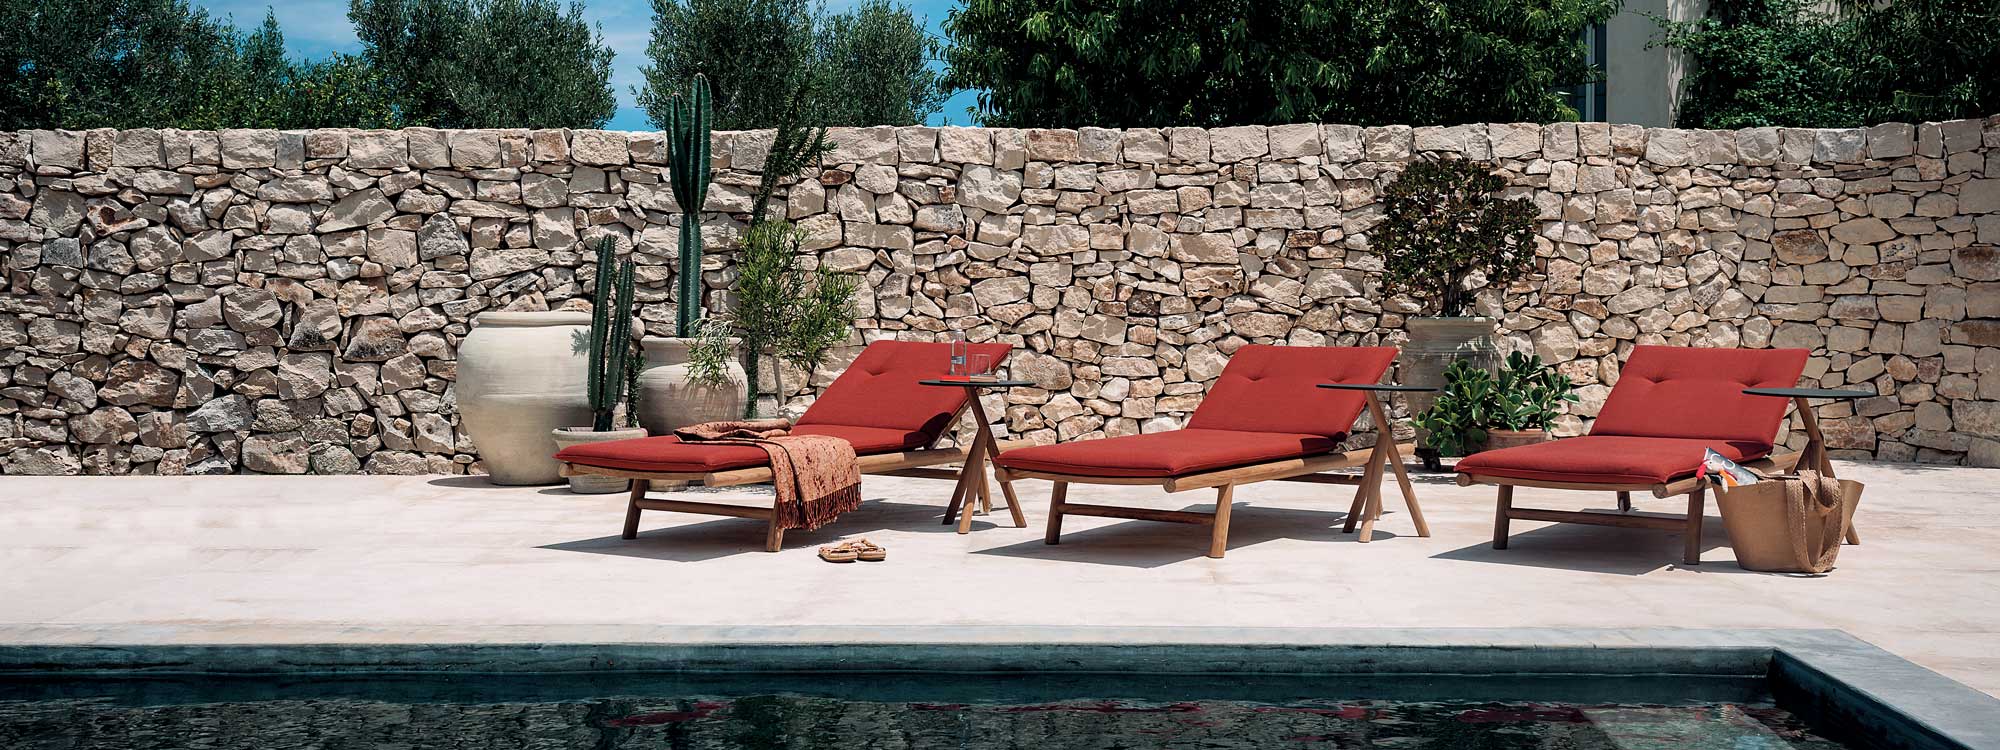 Image of row of 3 RODA Orson teak sun loungers with read cushions on poolside, with dry stone wall in background